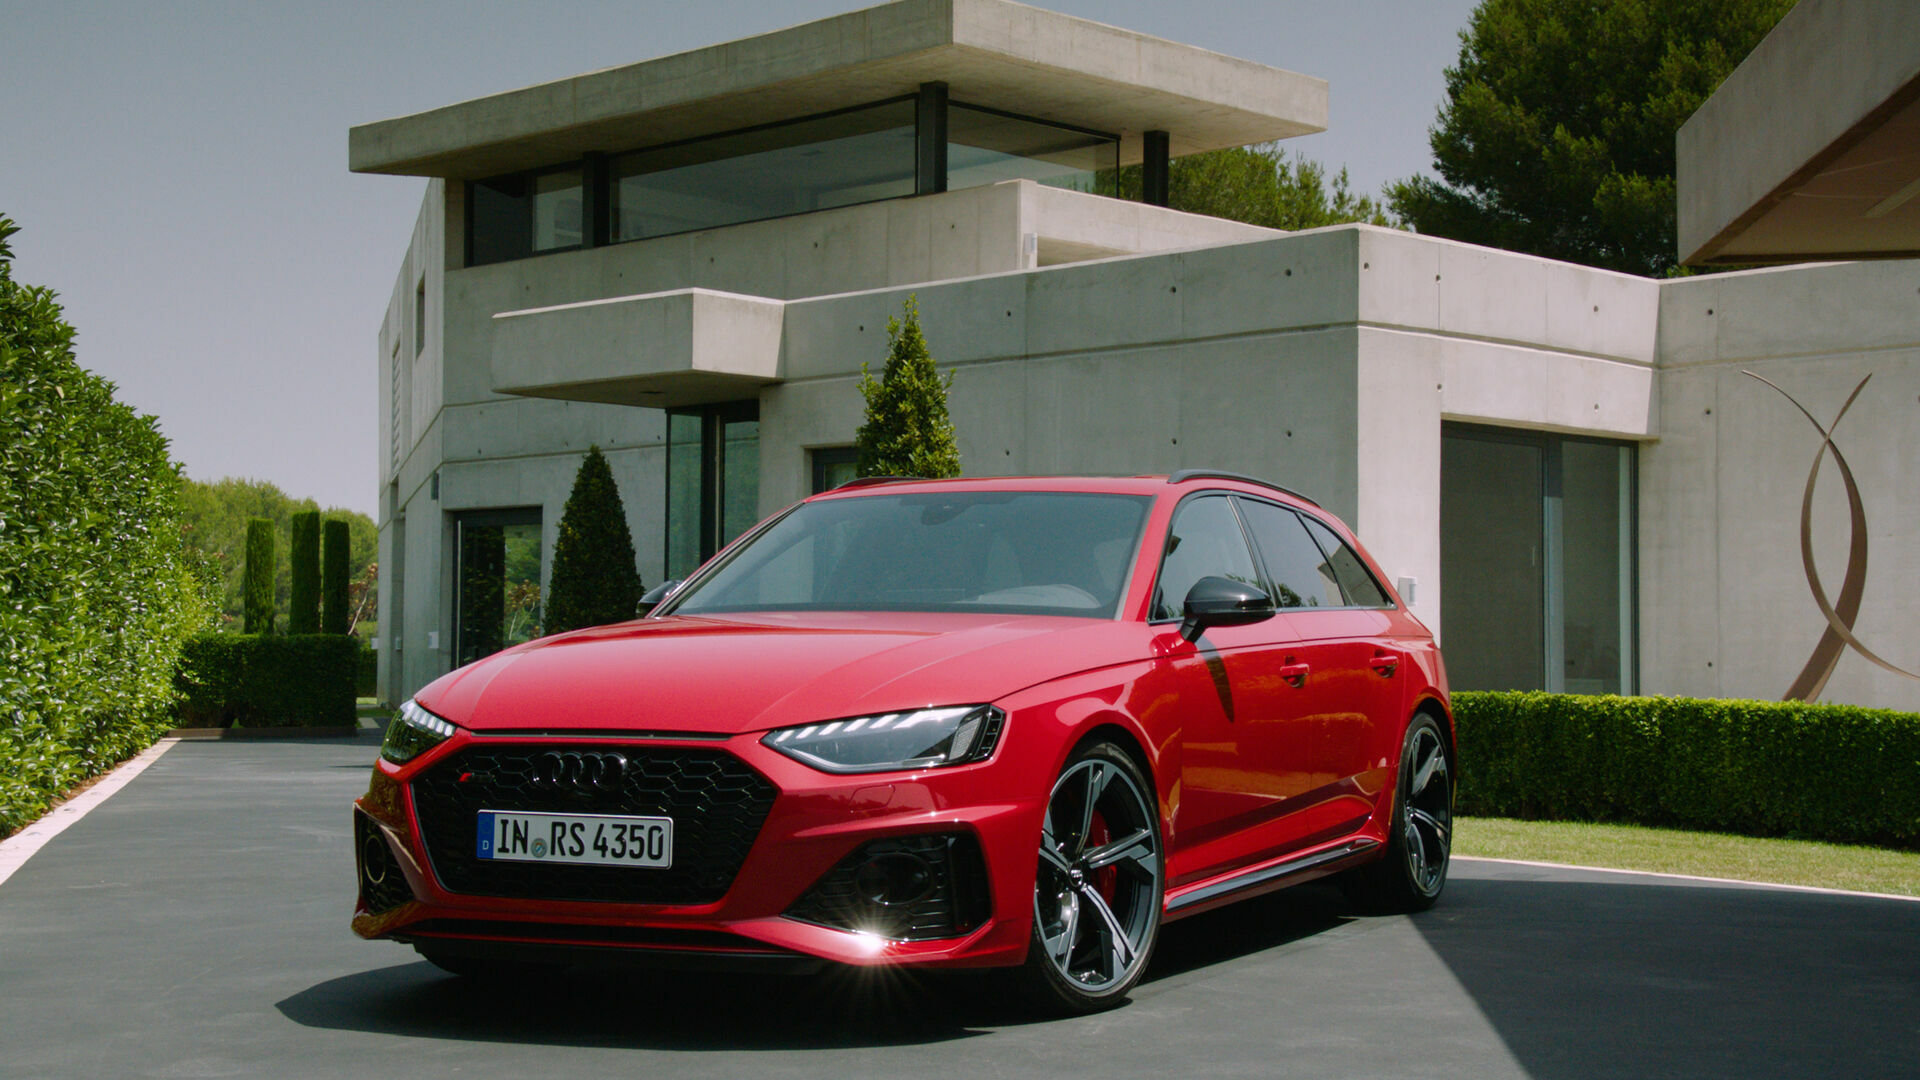 Update for the Audi RS 4 Avant (Trailer)